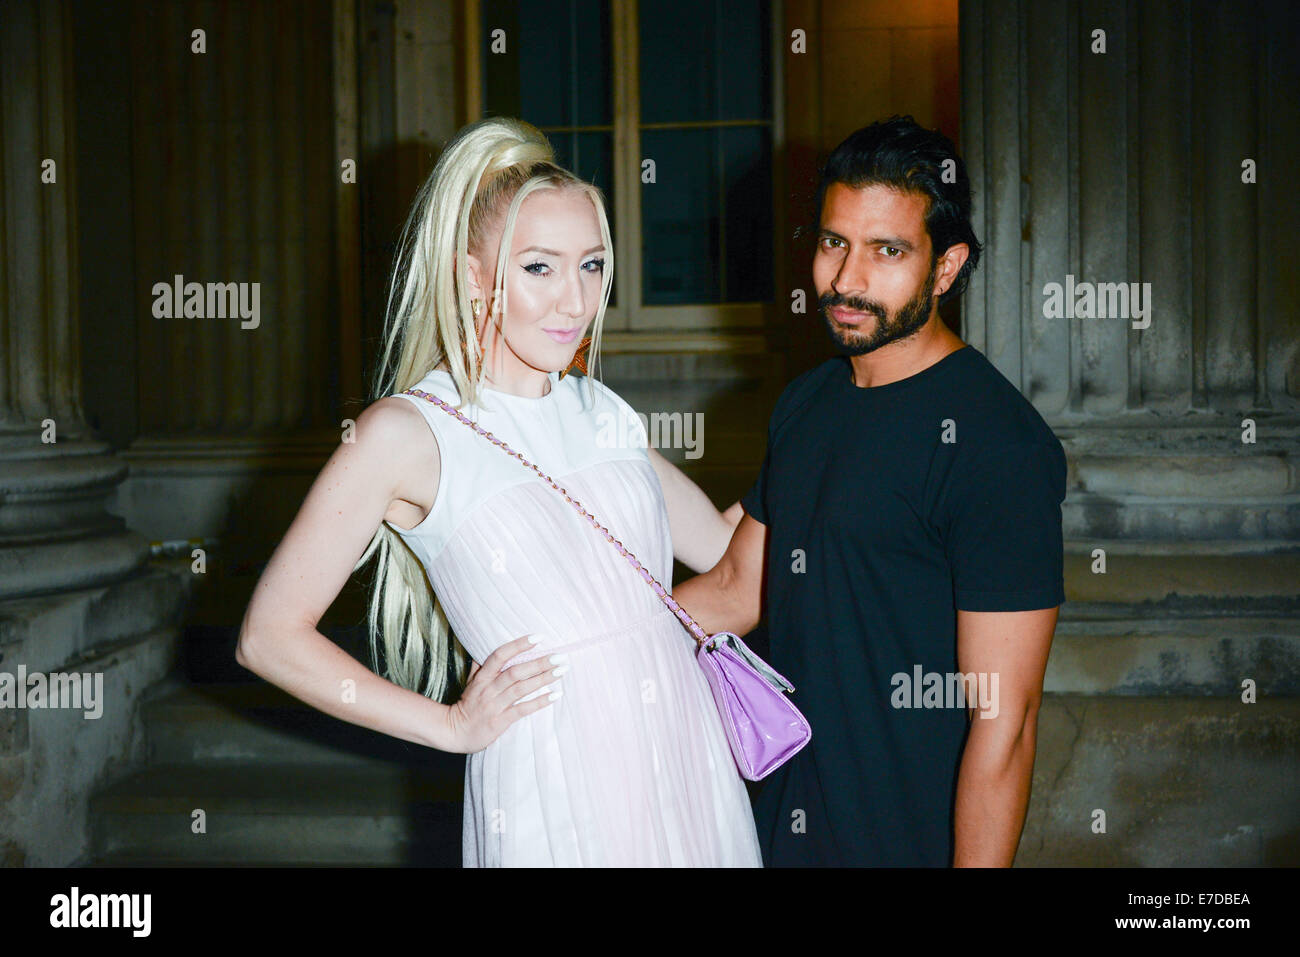 London,England,14th Sept 2014 : Fashion Stylish Alexis Knox and Creative Director Nik Thakkar attends Lismore showcases new collection at the LFW s/s 2015: Sorapol catwalk show at The Royal College of Surgeons in London. Photo by See Li Stock Photo